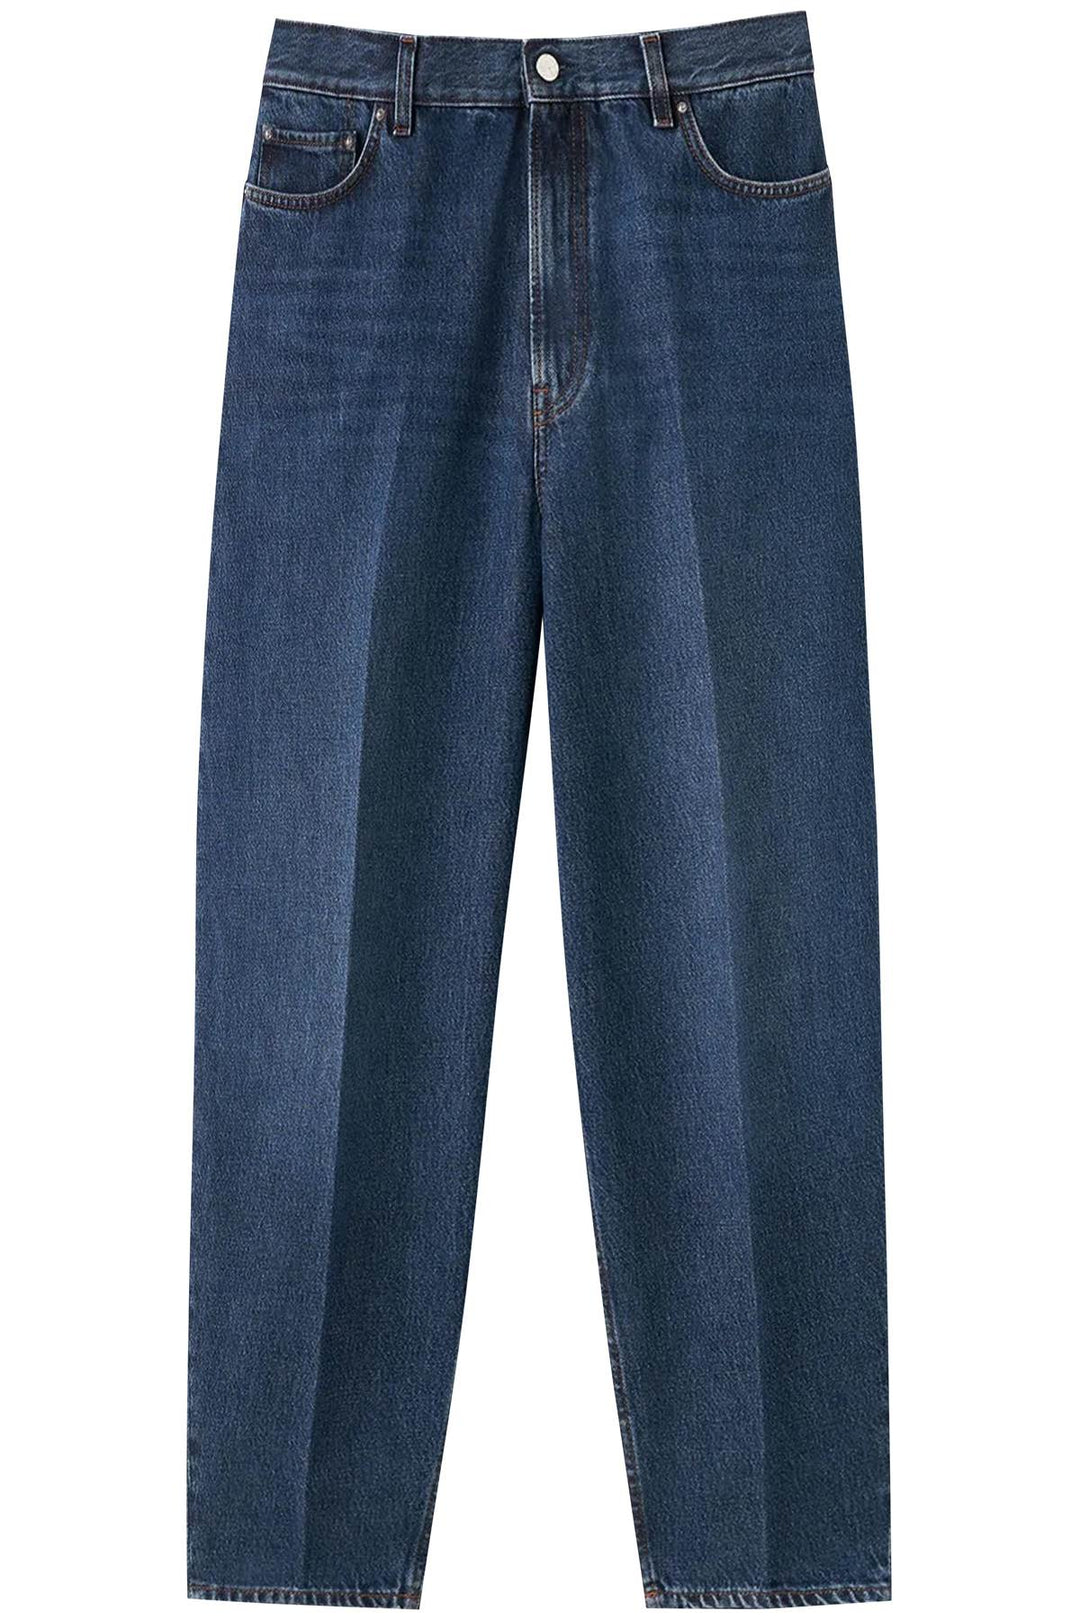 Toteme Wide Tapered Jeans   Blu